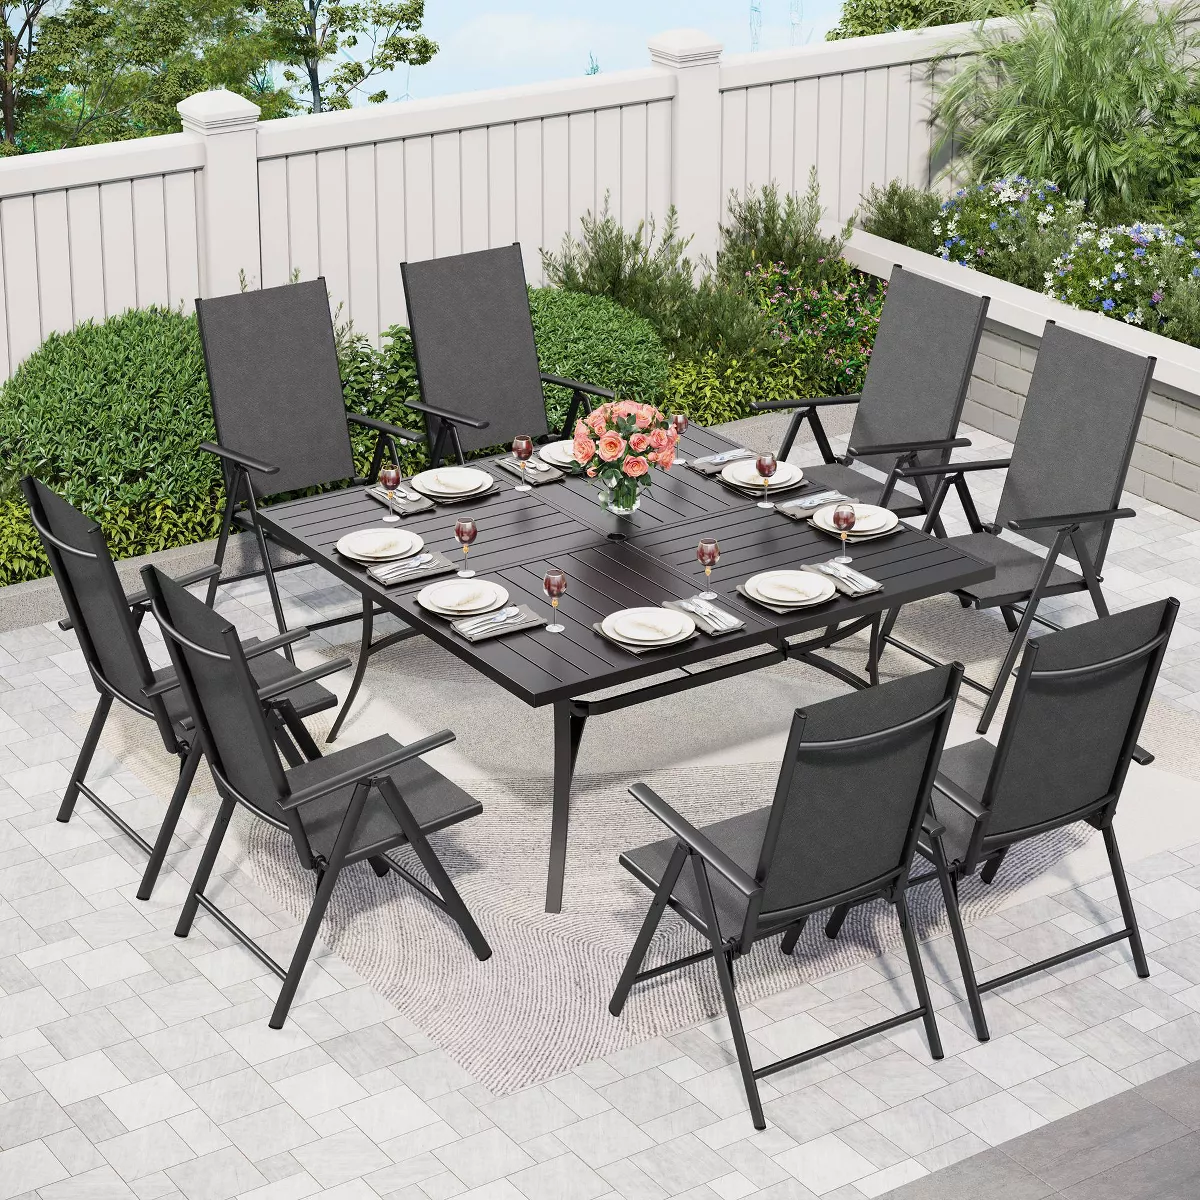 outdoor table set on patio